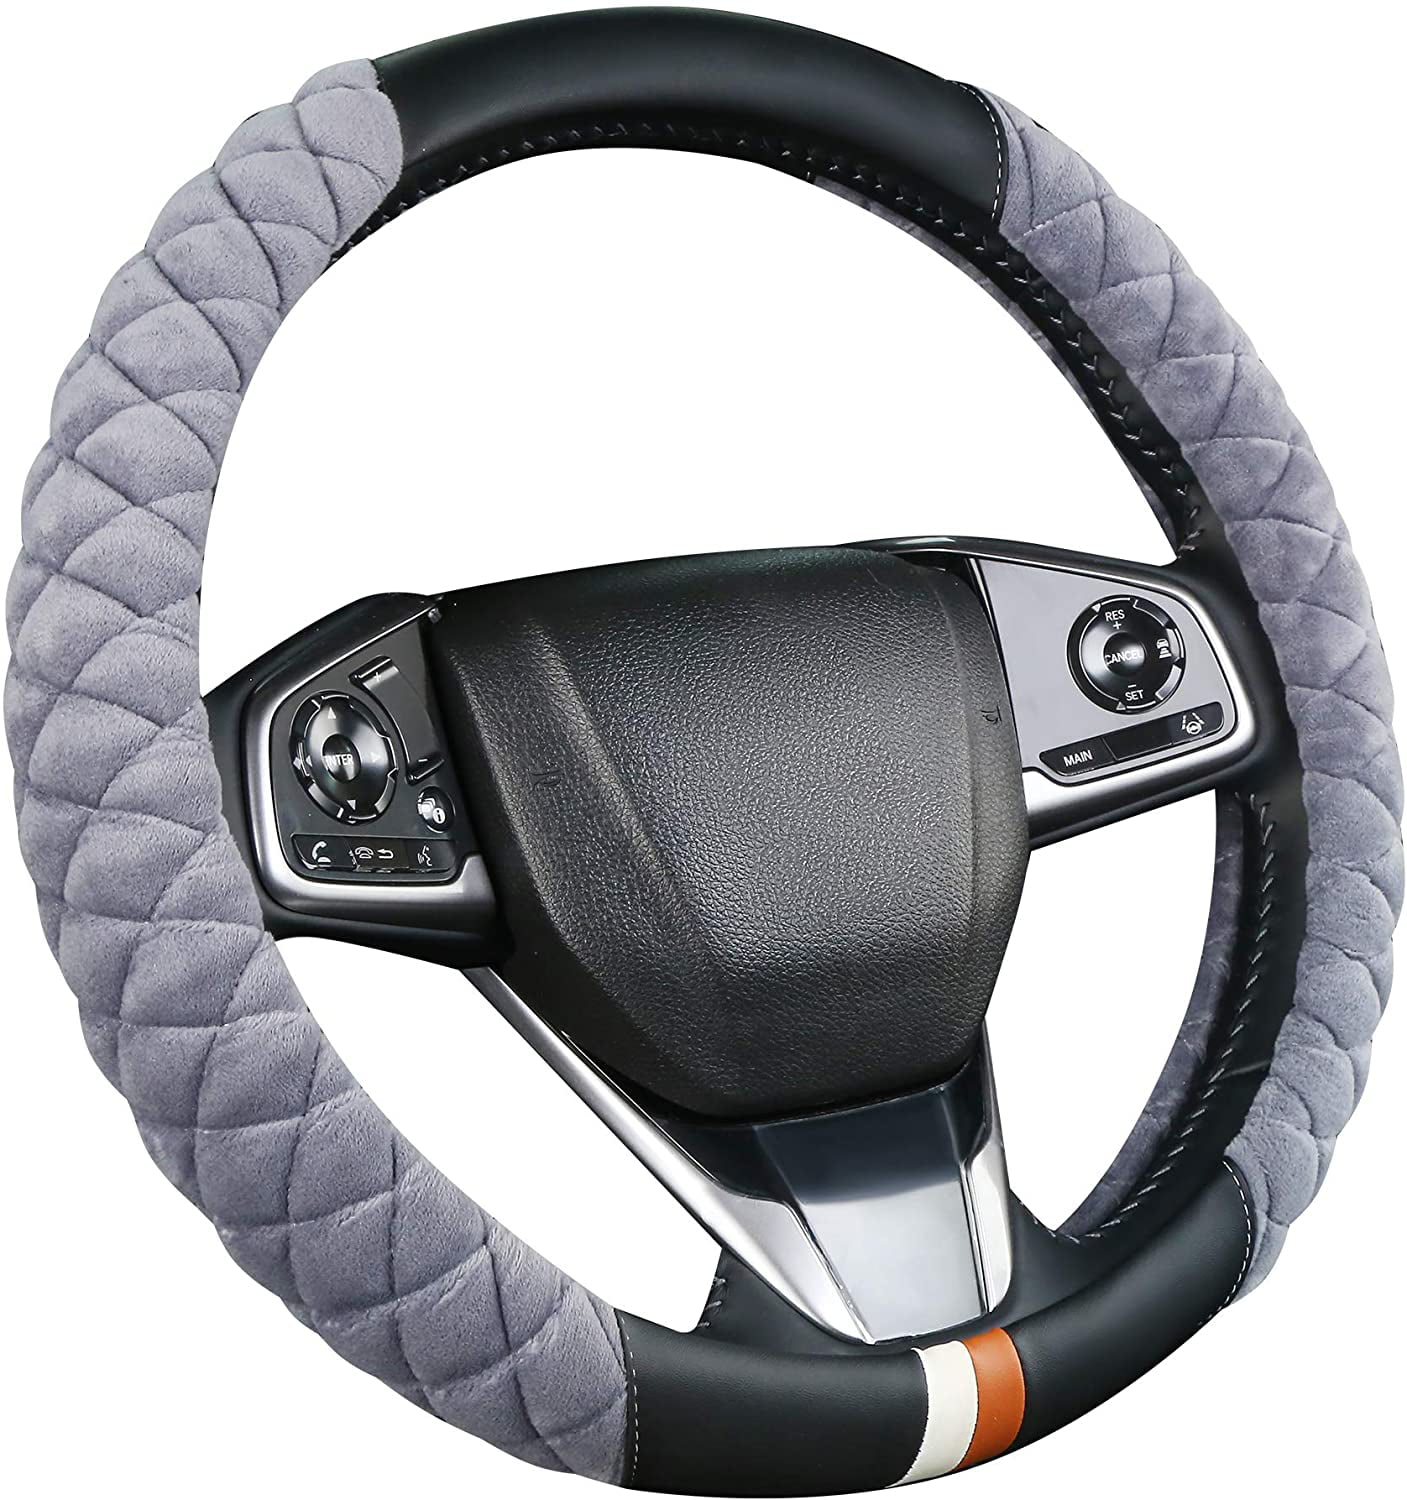 Odorless Anti-Slip Steering Wheel Cover Microfiber Leather Auto Car Steering Wheel Cover Universal 15 inch Car Accessories for Women and Man 